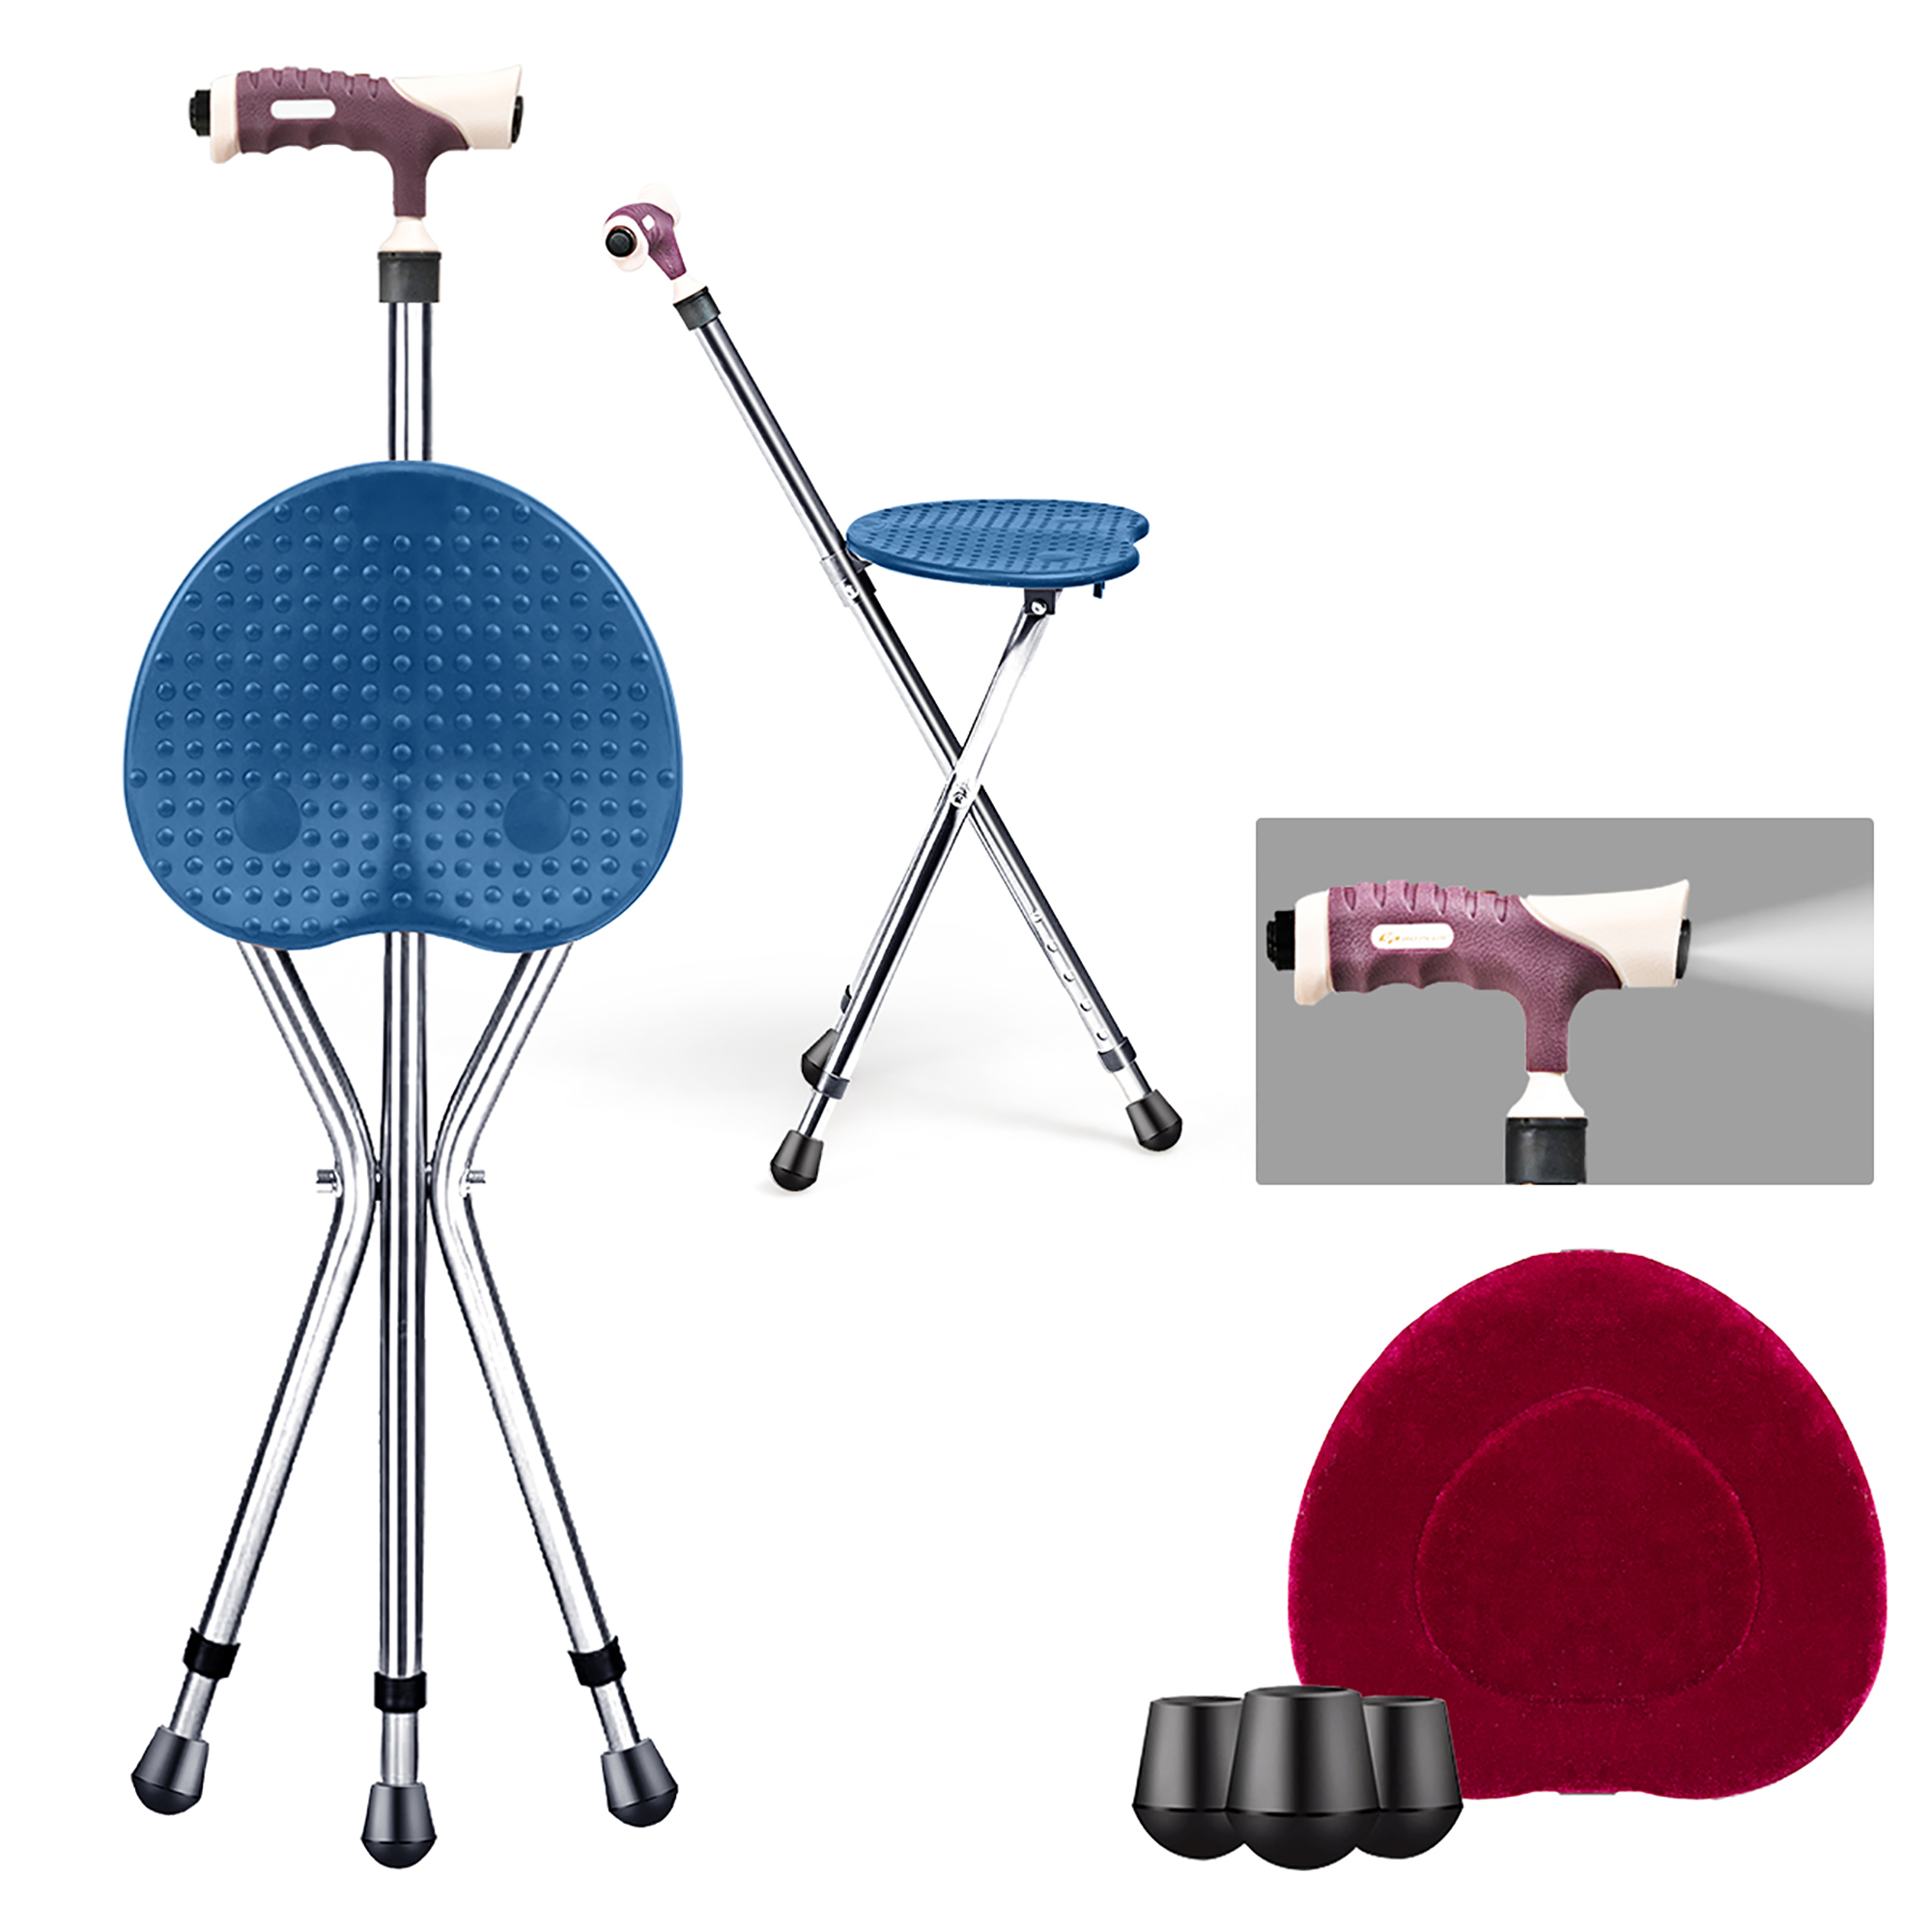 Goplus Adjustable Folding Cane Outdoor Seat Stool Aluminum Alloy Crutch Chair with Light Blue - image 1 of 10